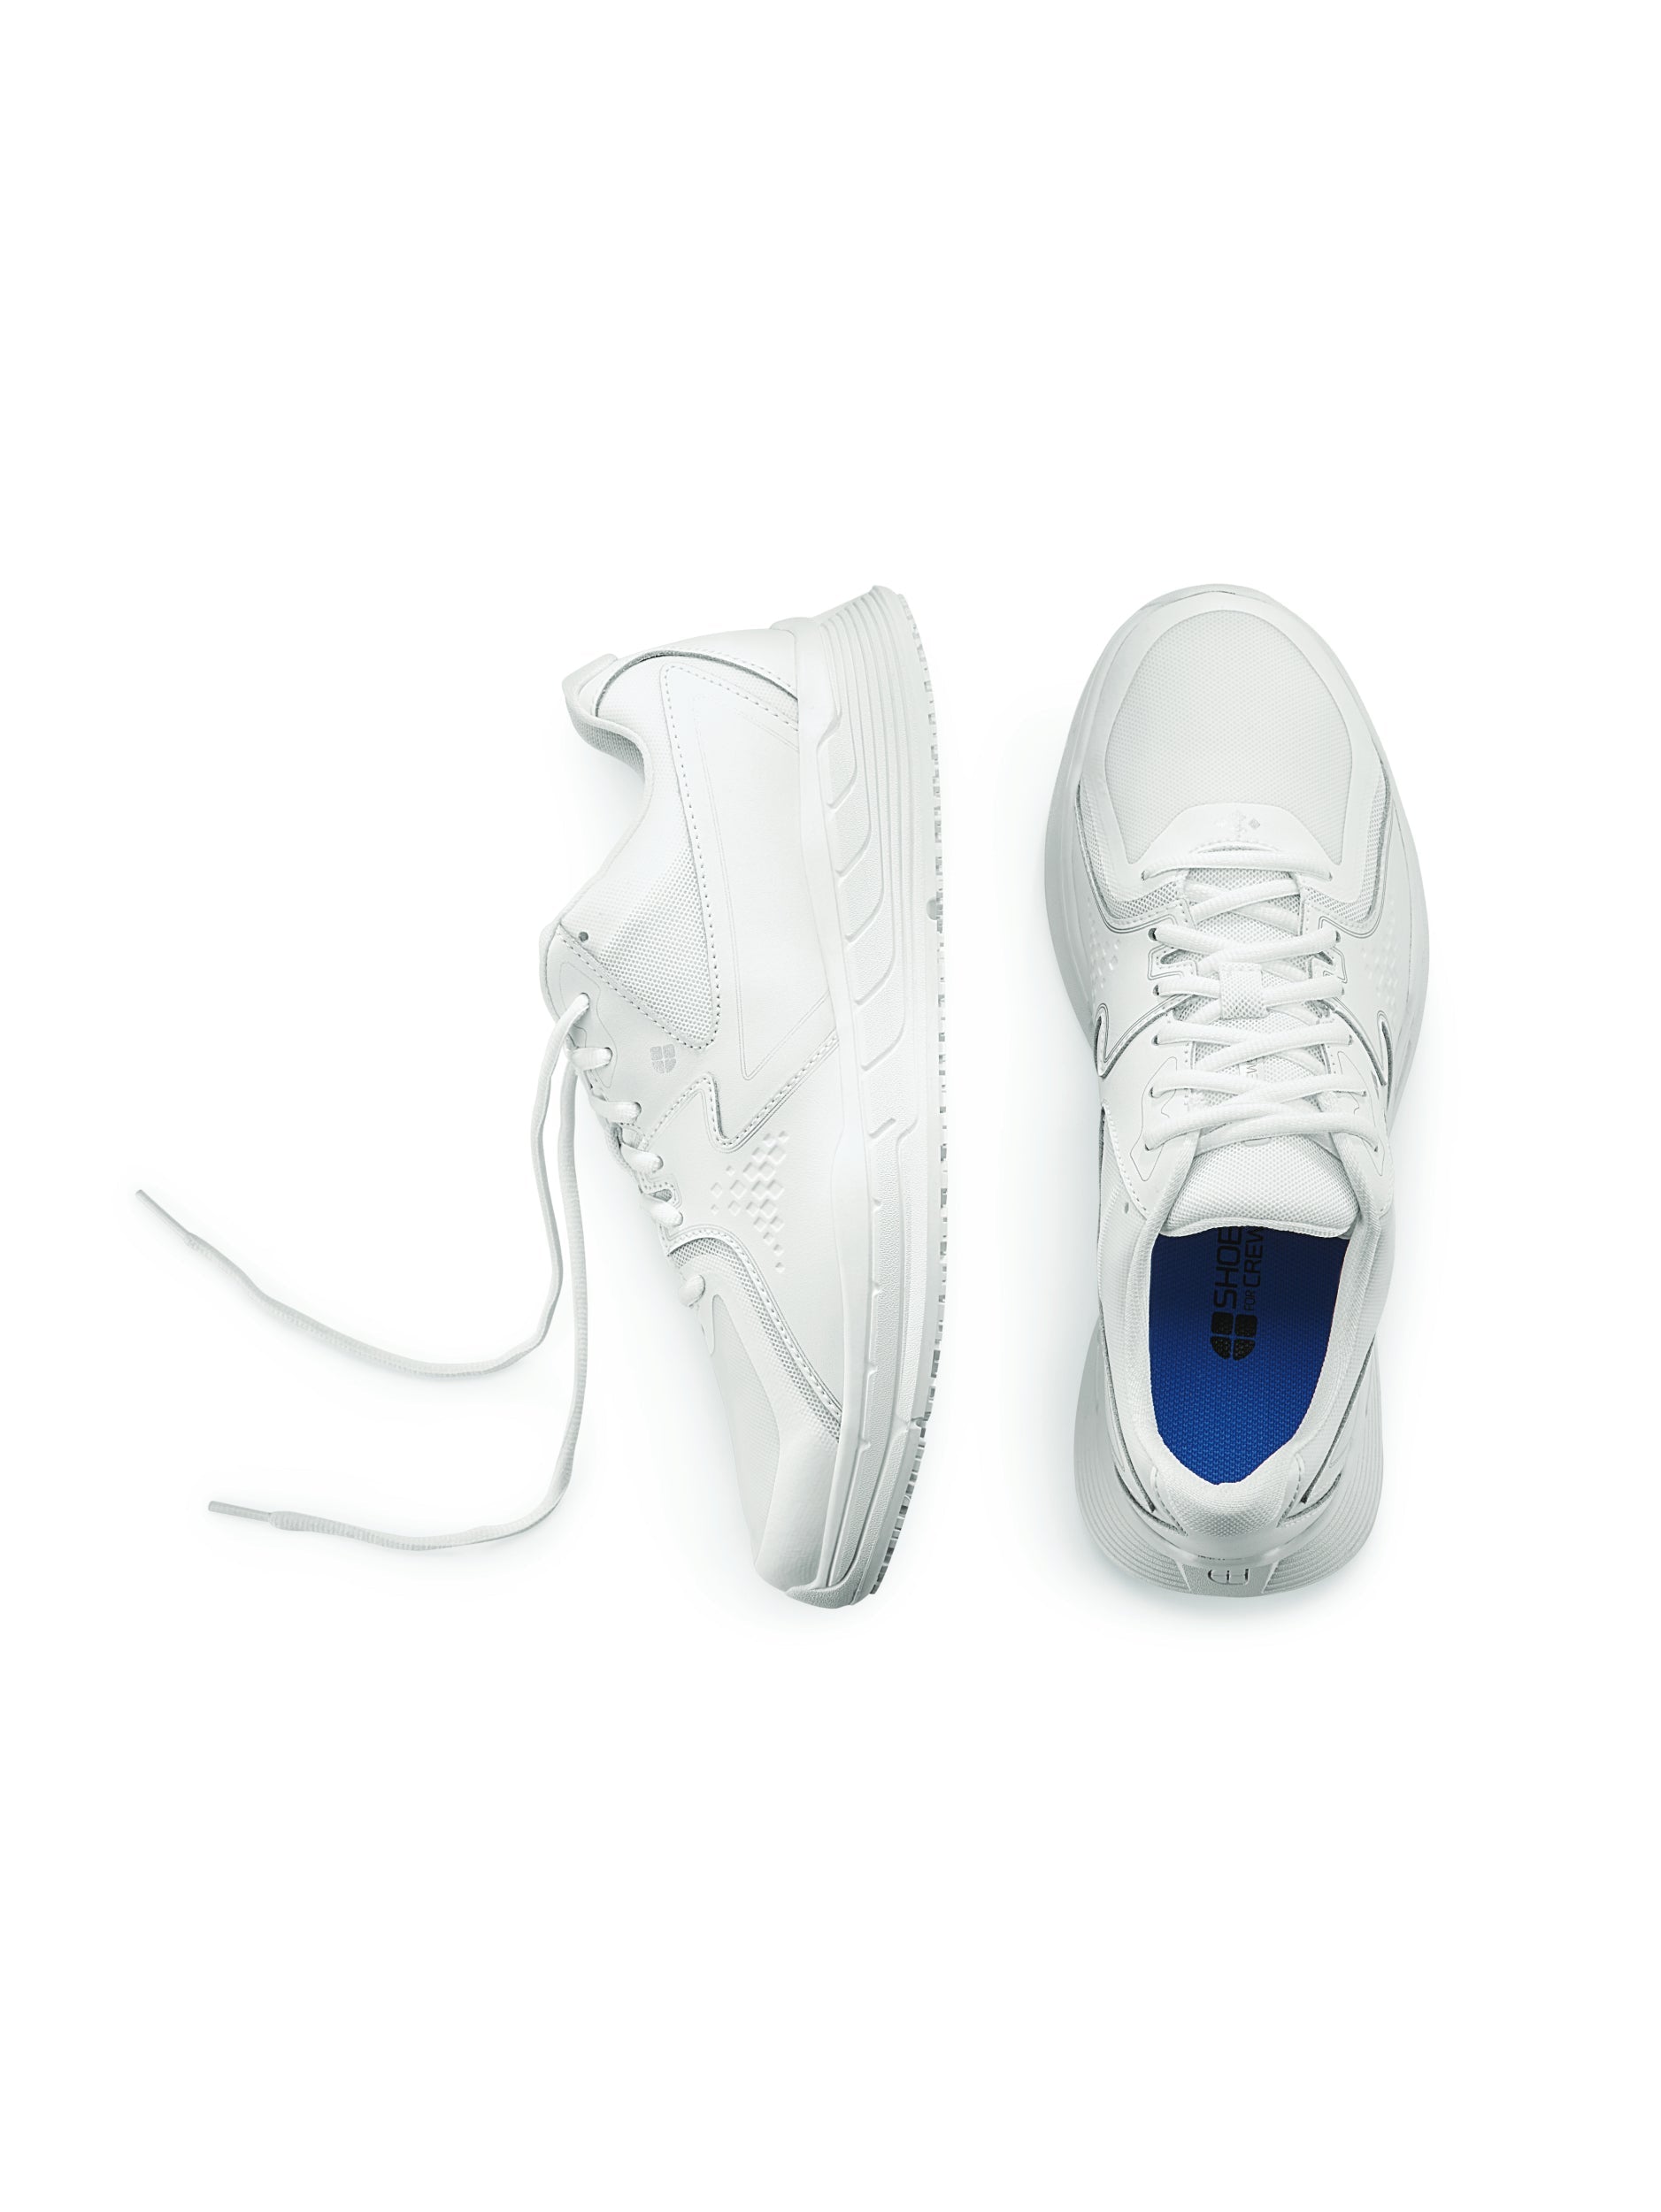 Men's Work Shoe Condor White by  Shoes For Crews.